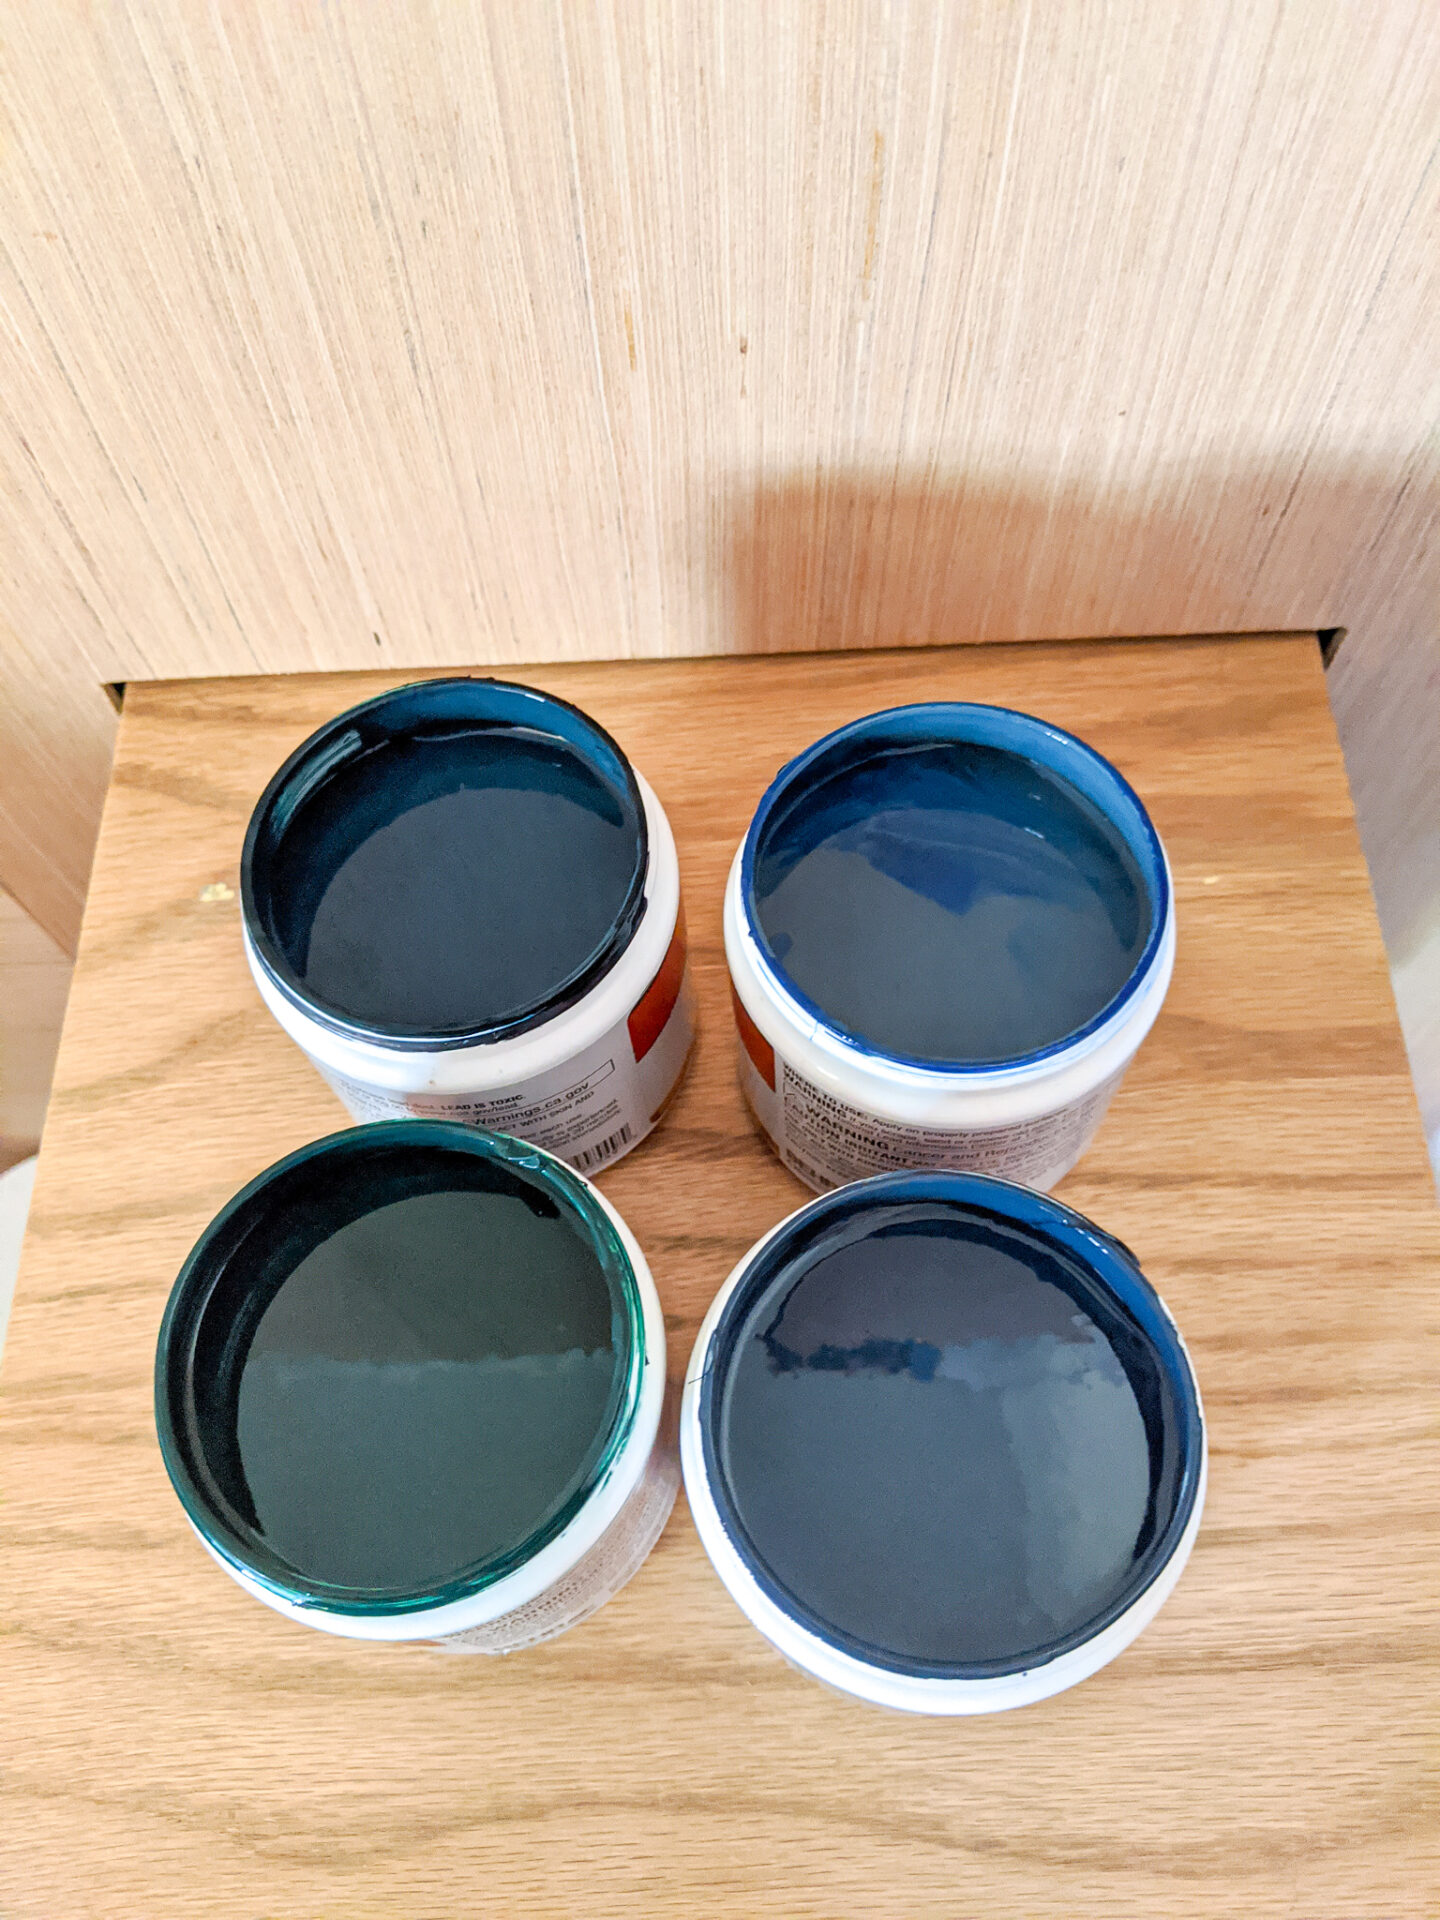 test pots of paint samples for picking the right color